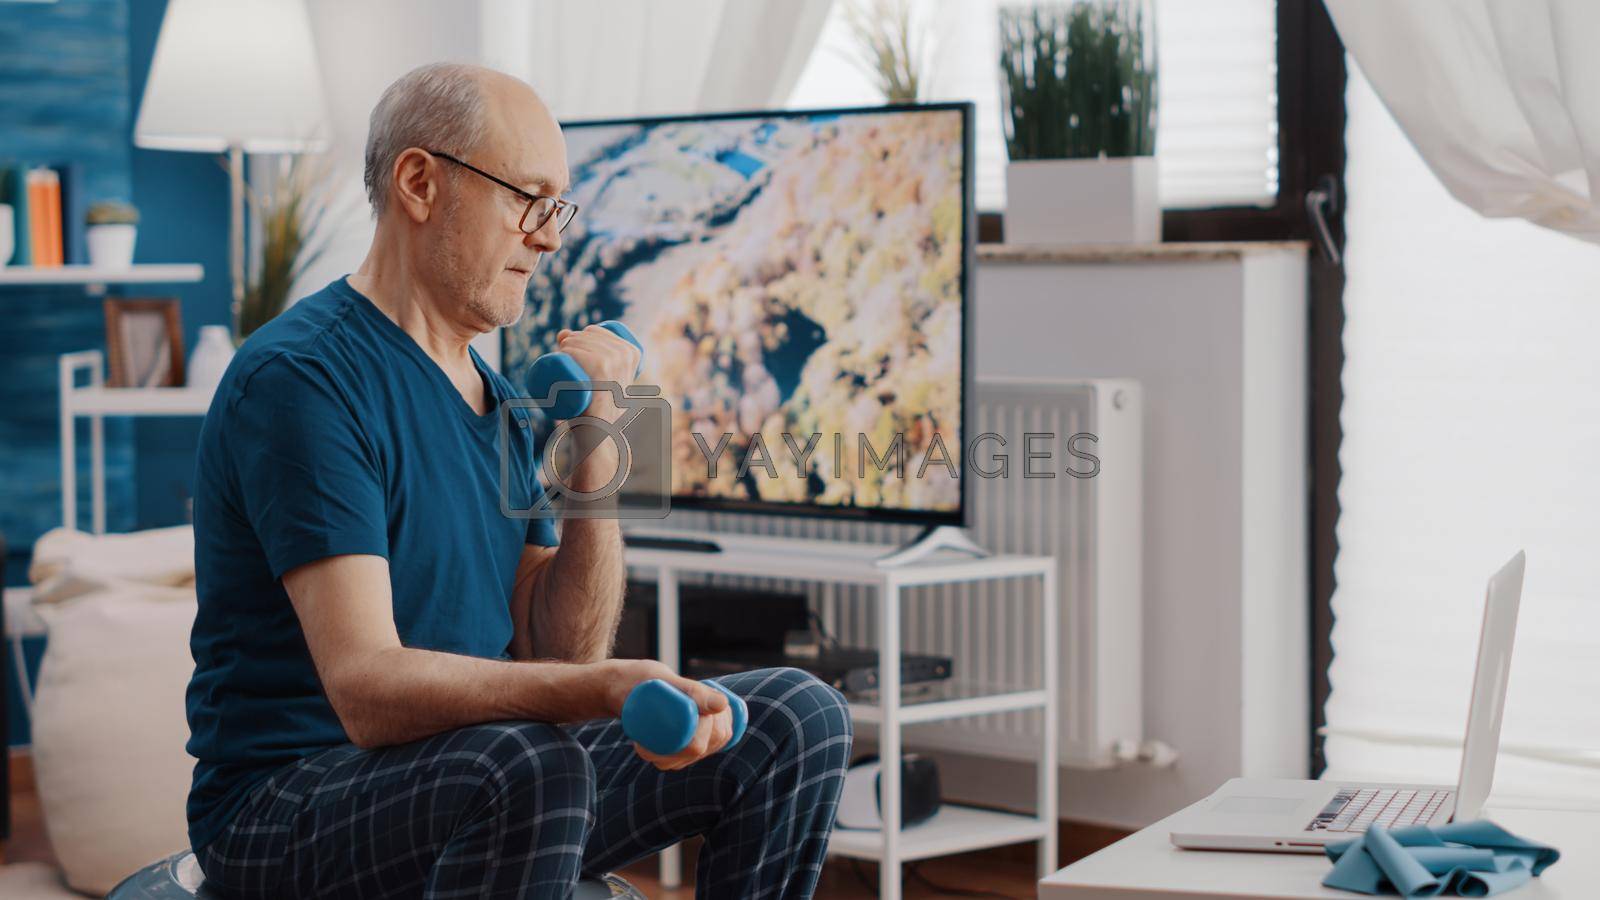 Man lifting dumbbells while sitting on fitness toning ball an looking at online video of workout on laptop. Retired adult doing exercise with weights and watching training lesson on device